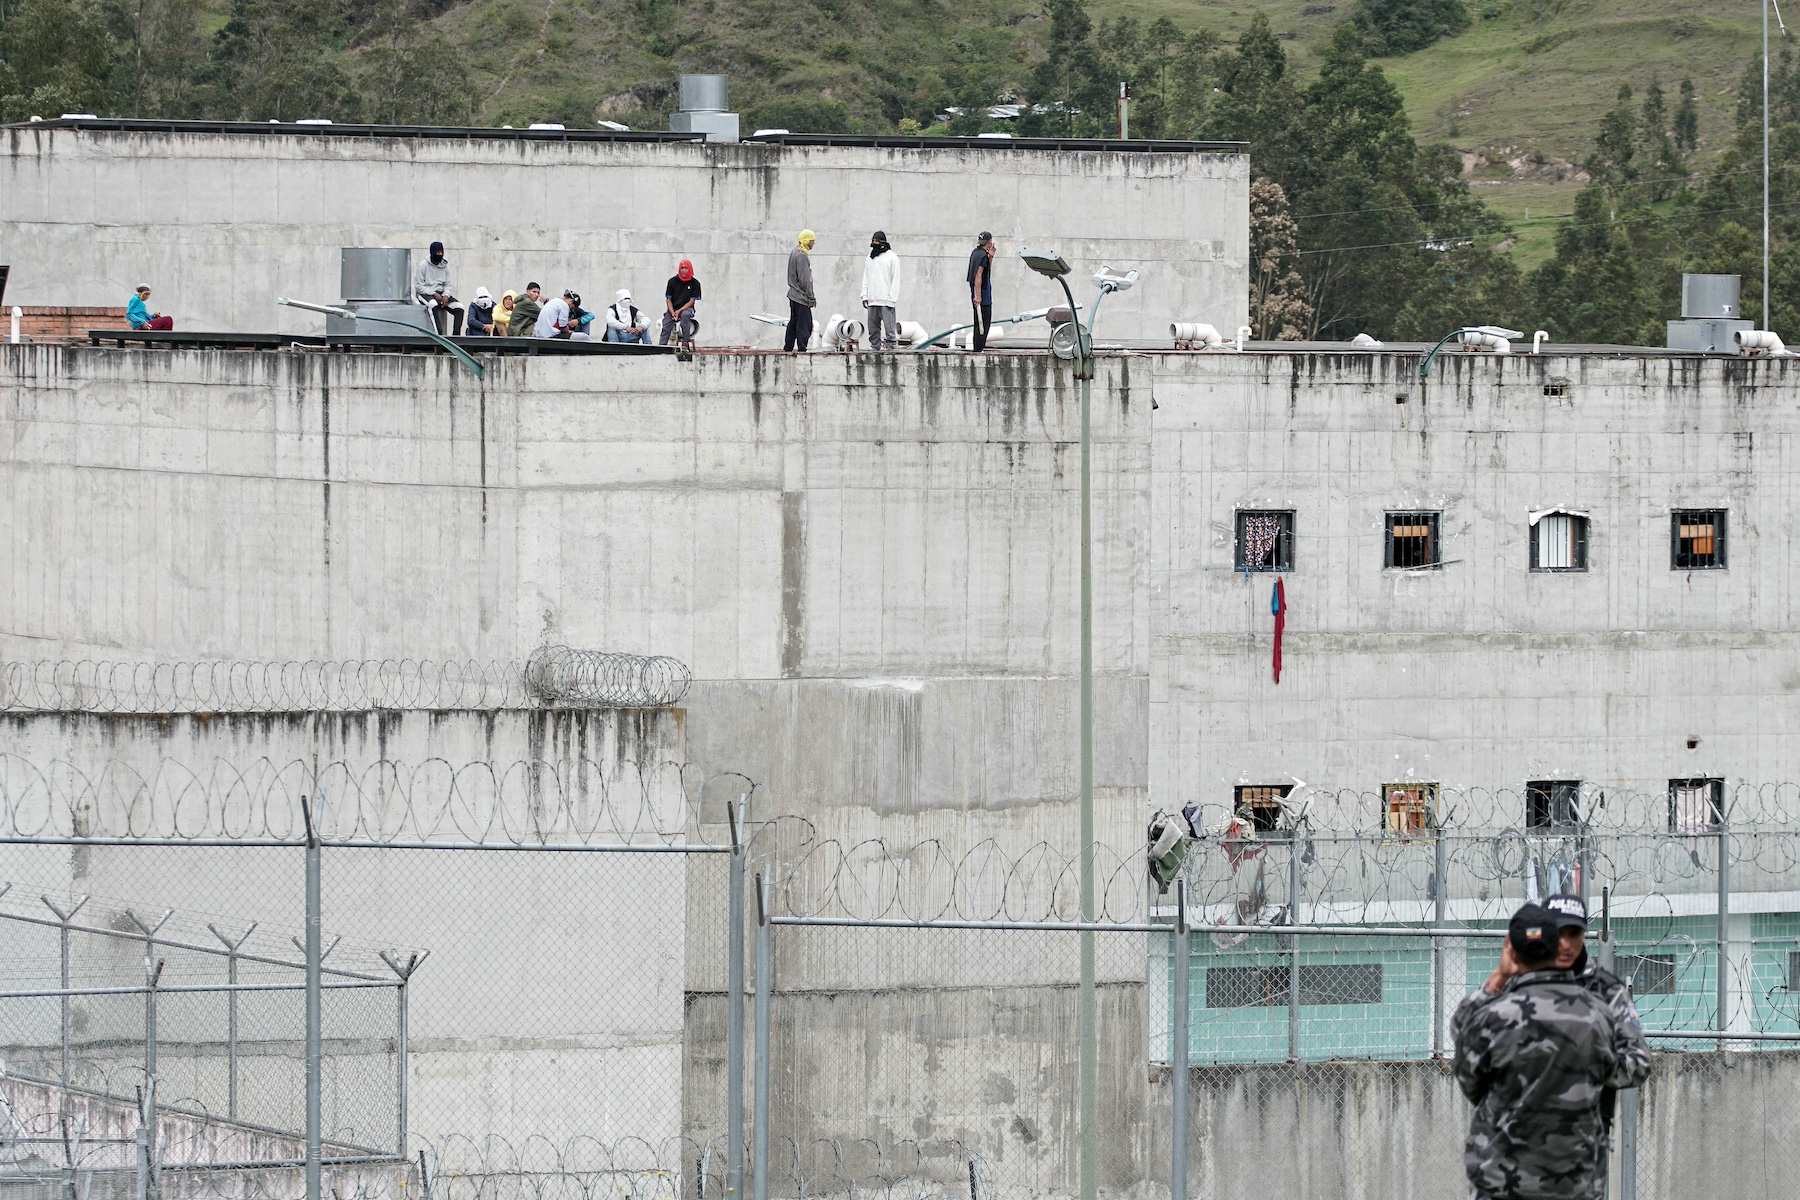 Ecuador’s Number One Criminal Escaped From Prison, And Now The Country Has Descended Into Complete Chaos